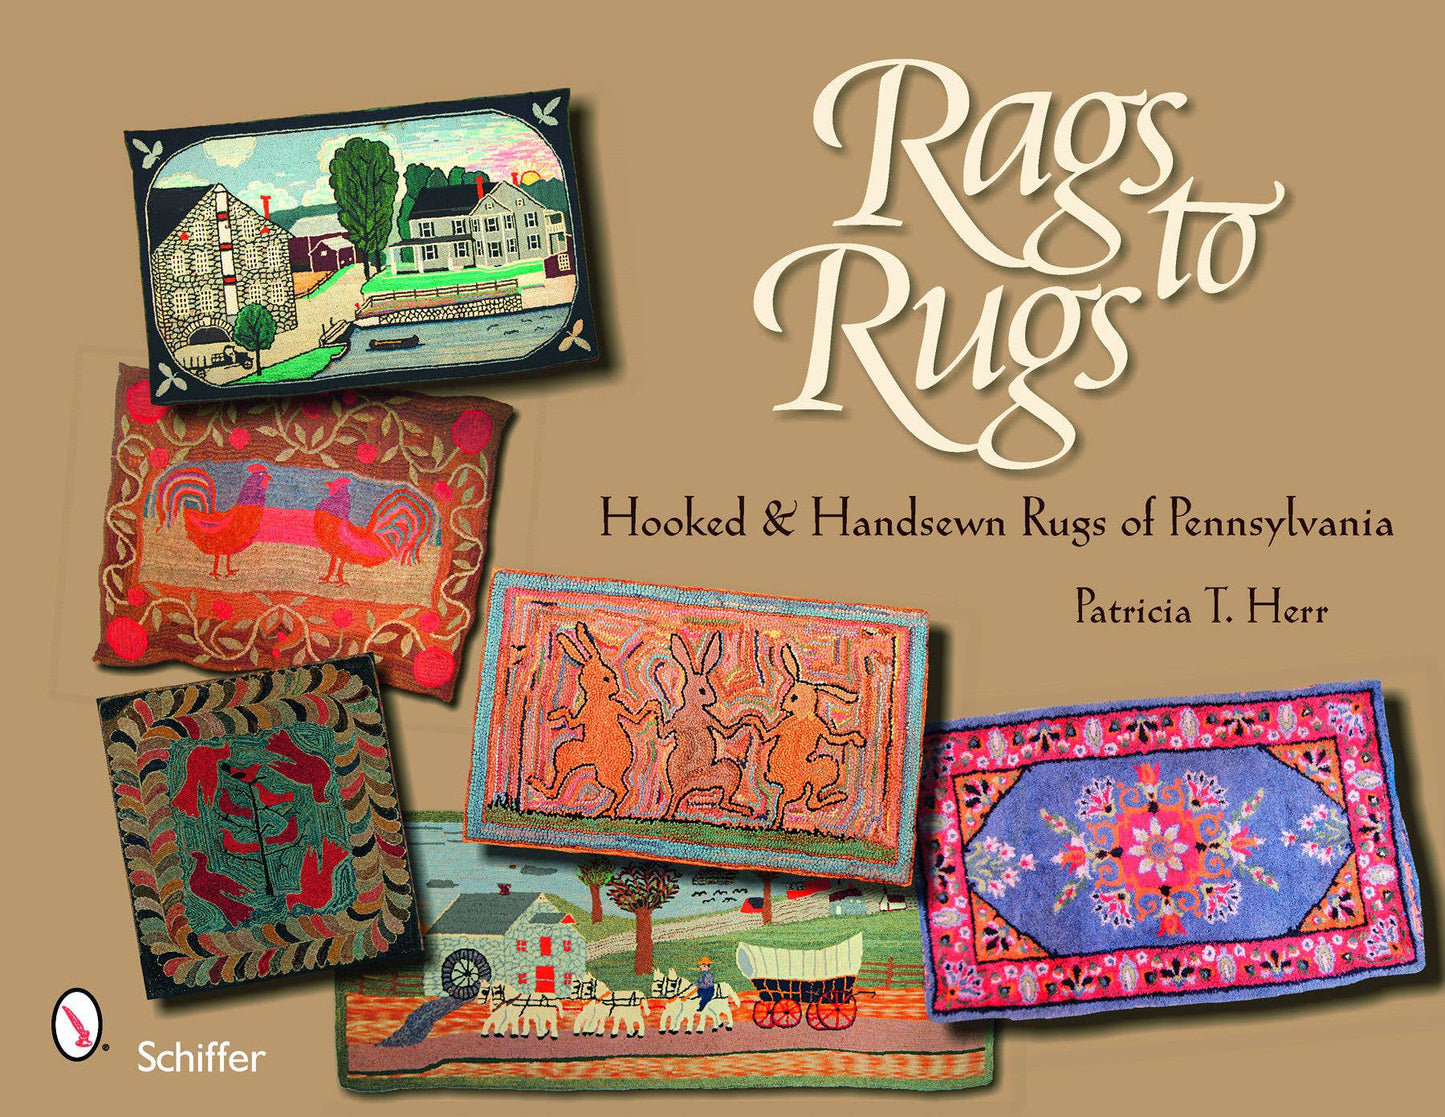 Rags to Rugs	Hooked & Handsewn Rugs Of Pennsylvania